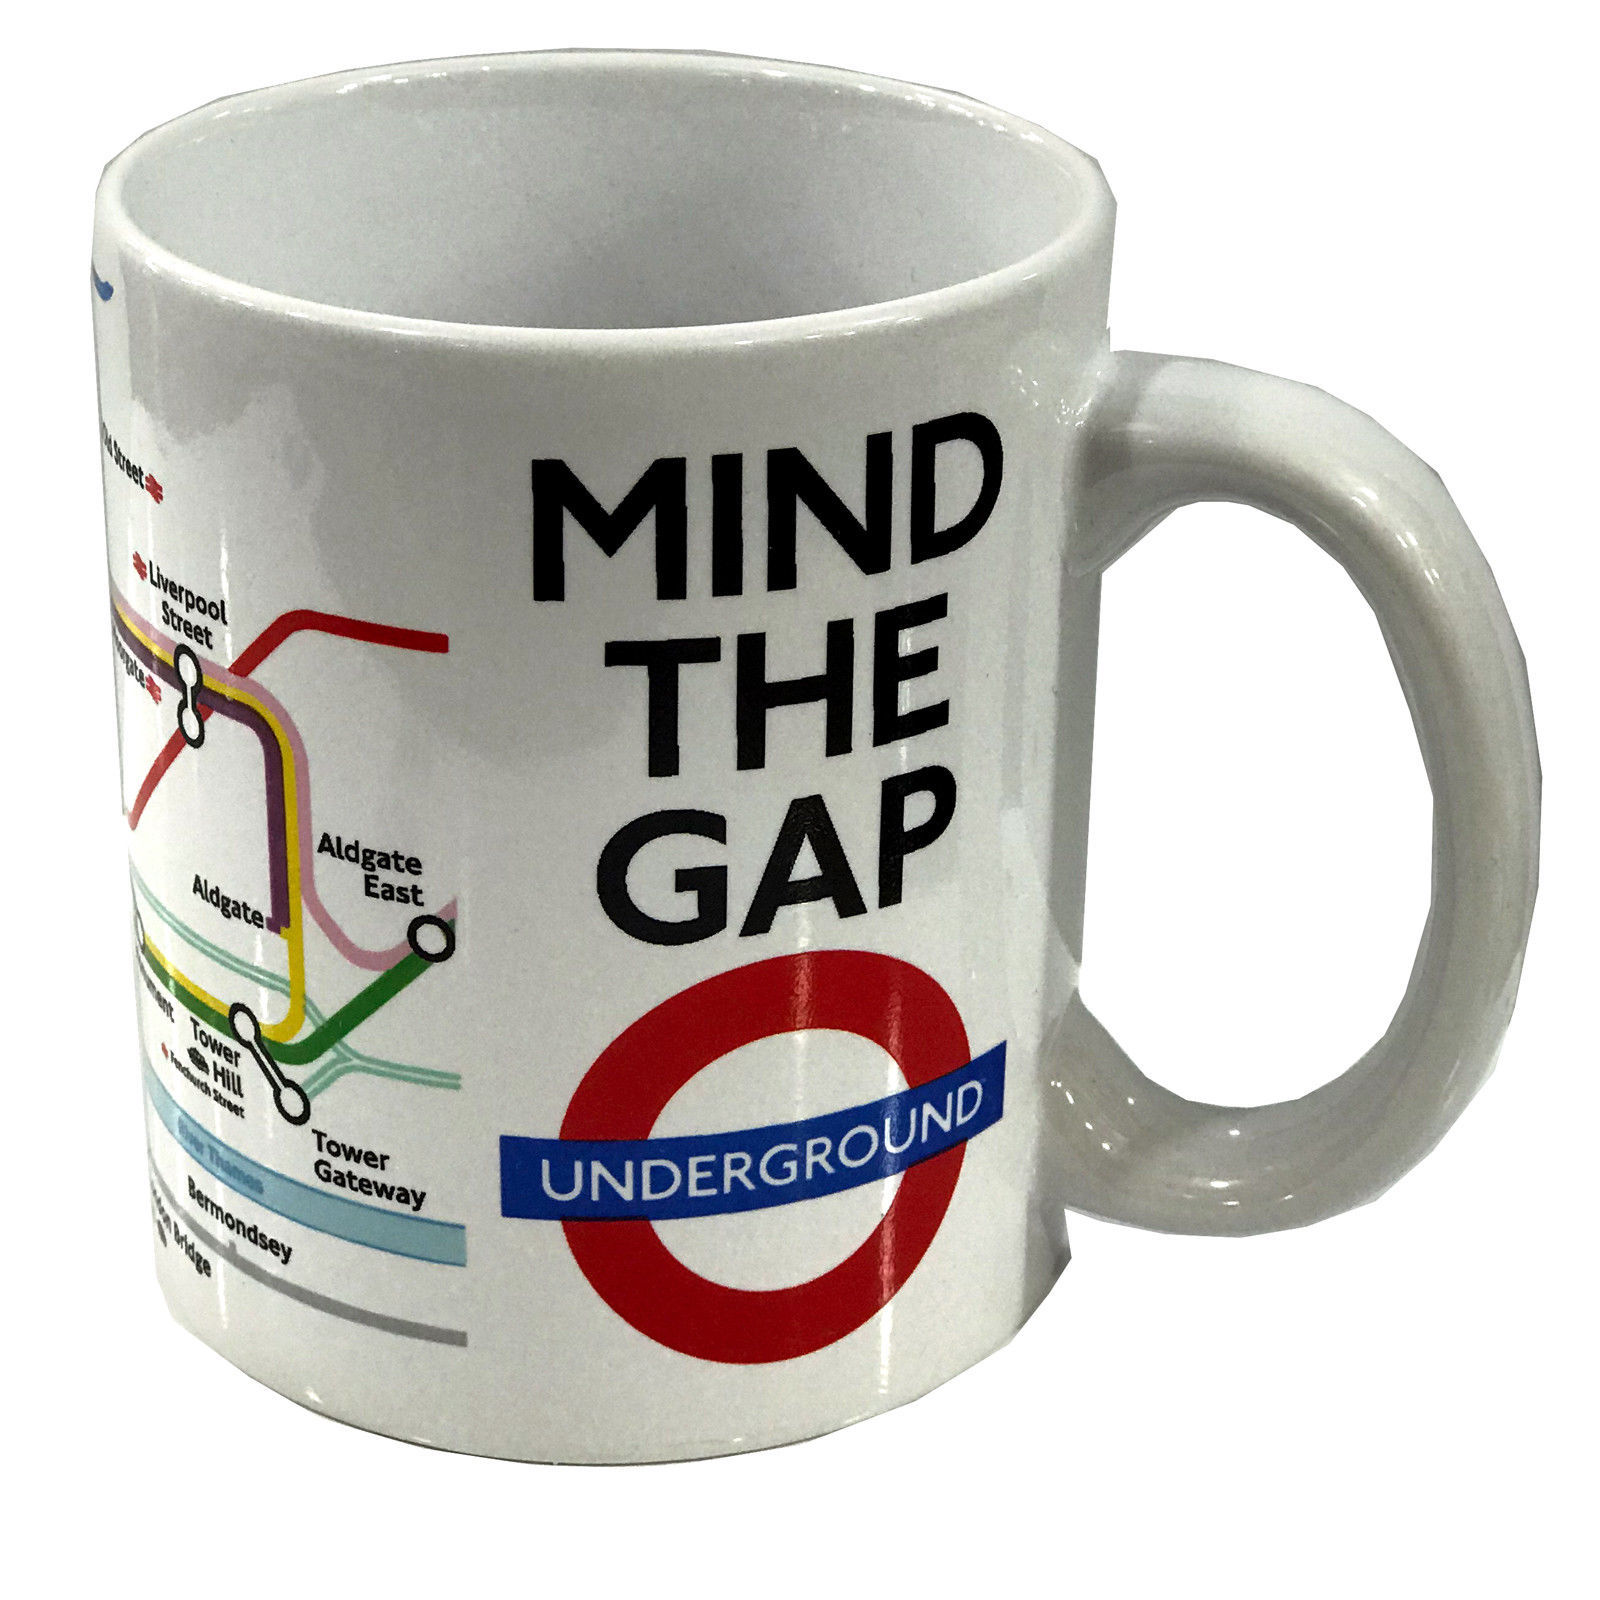 Top 105+ Images mind the gap coffee photos Updated